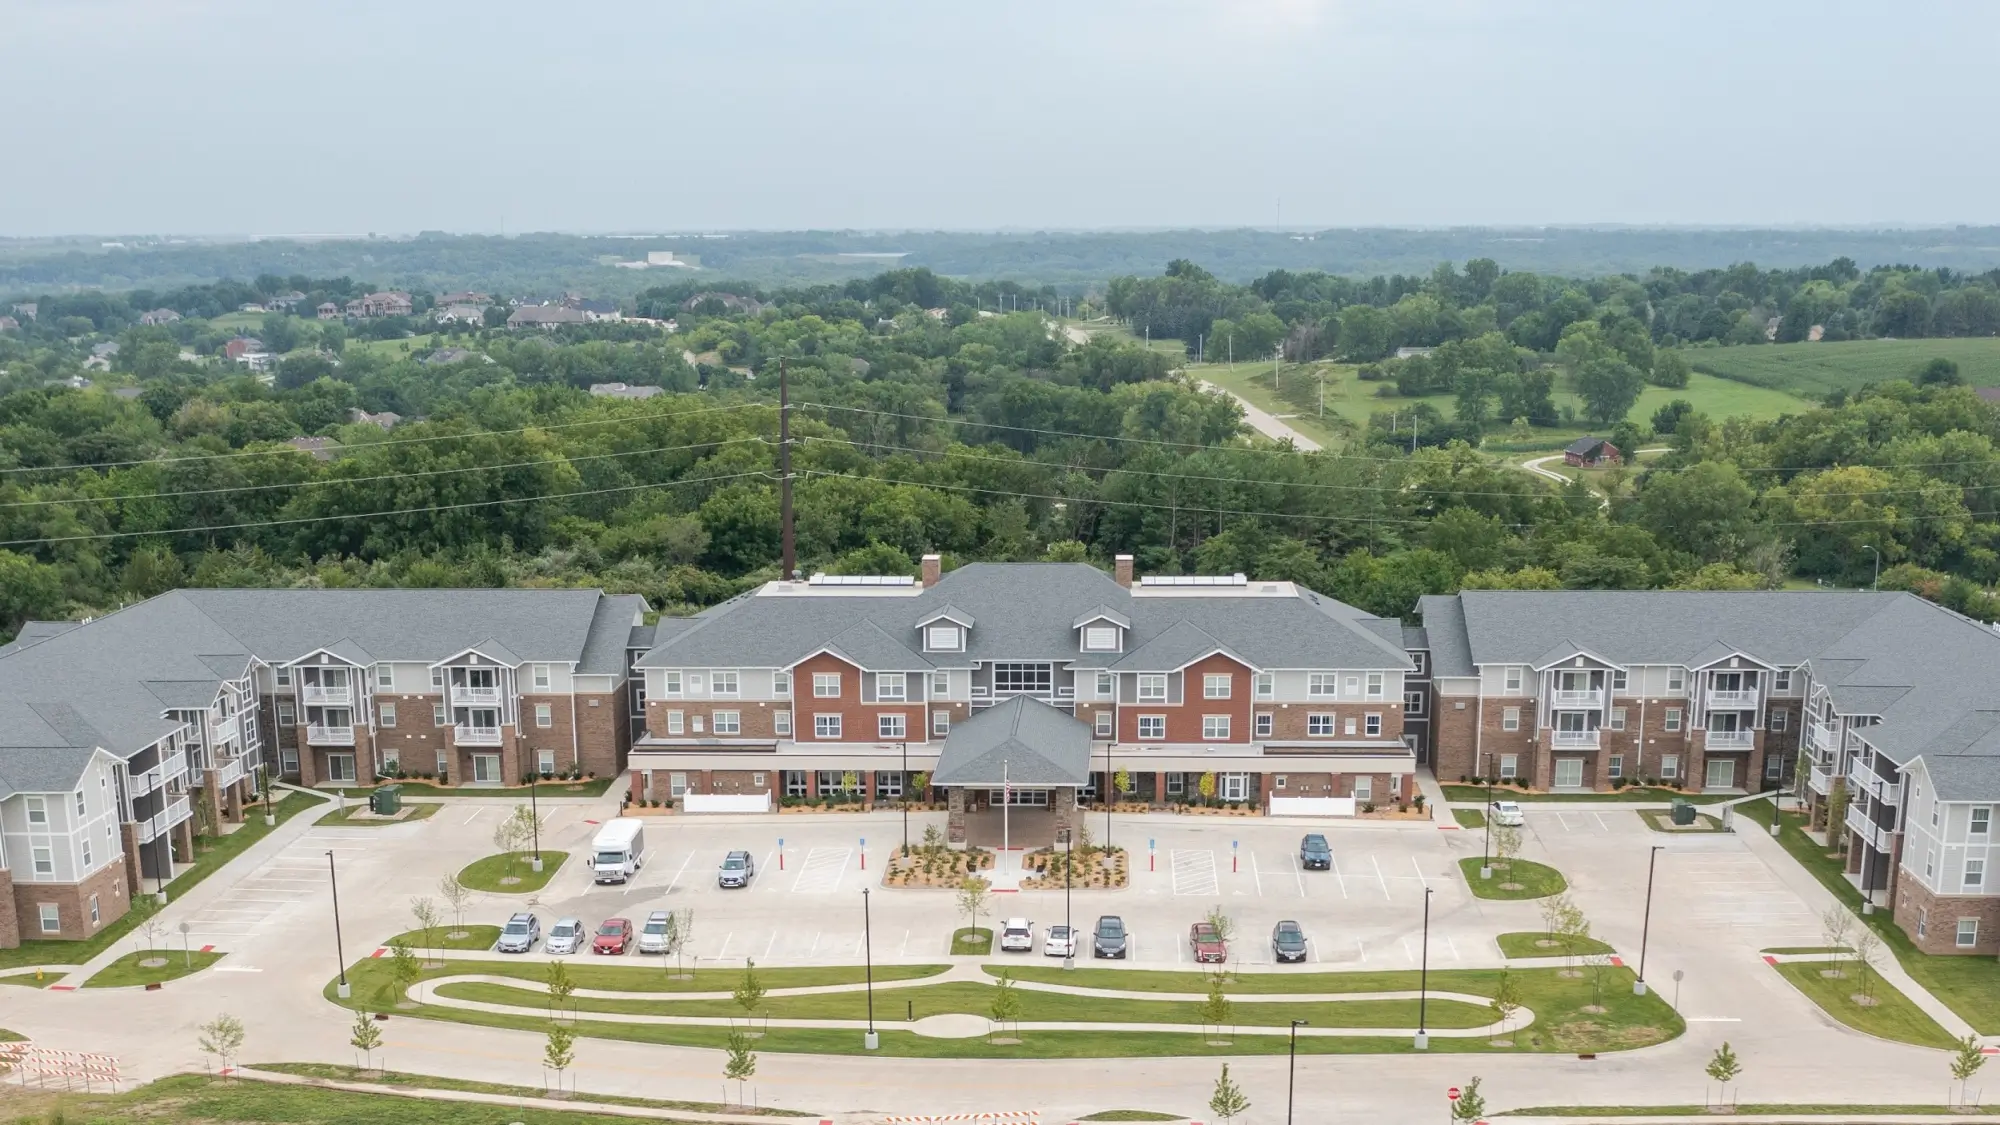 Aerial View of Glen Meadows Retirement Community in West Des Moines, Iowa